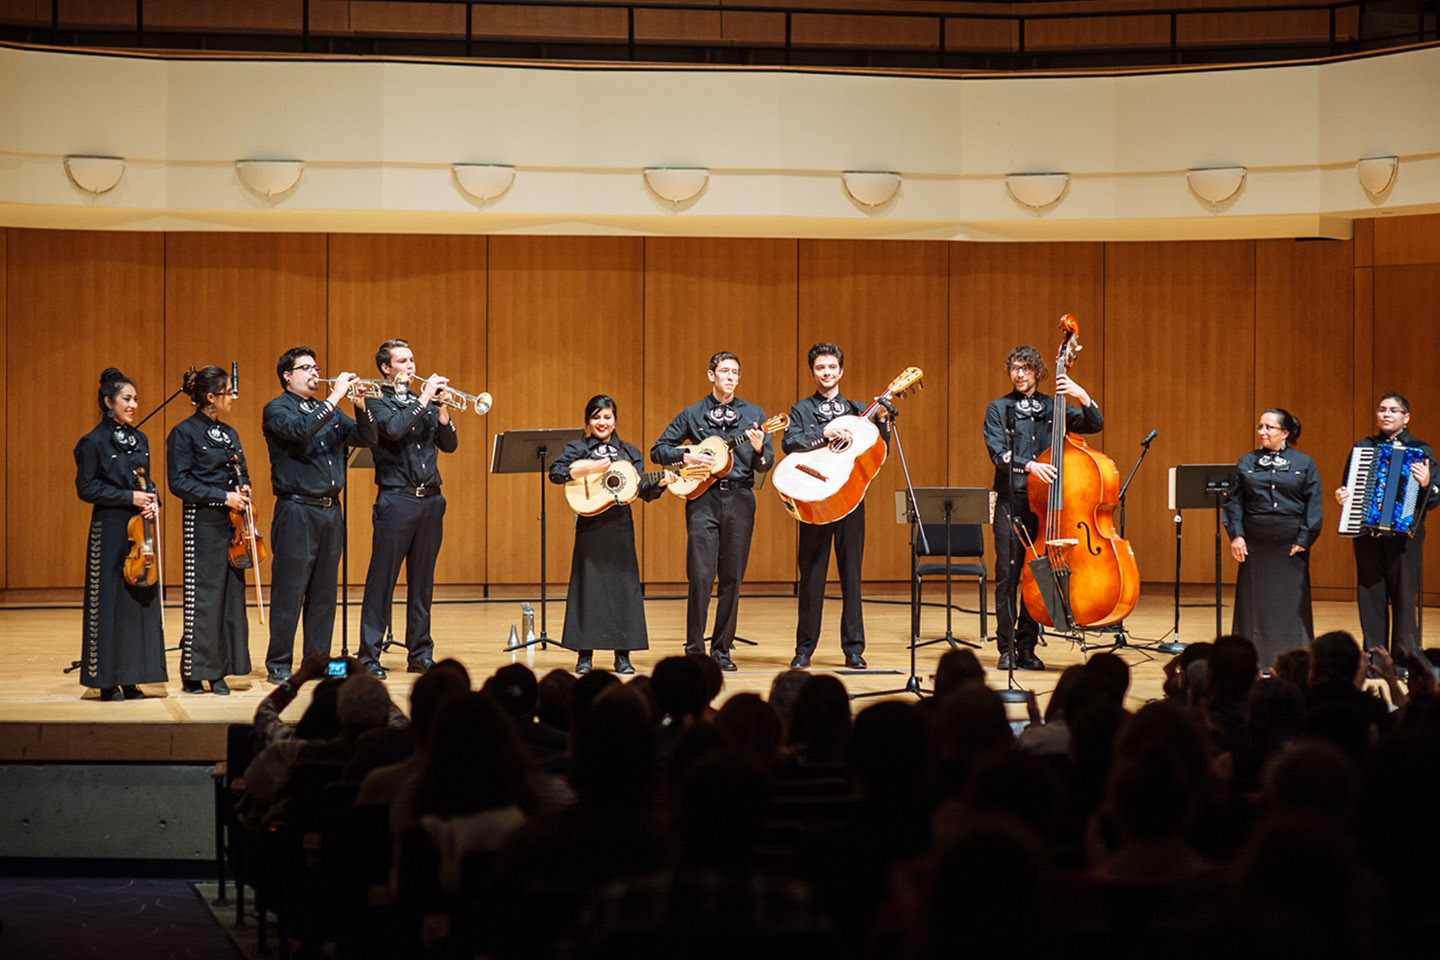 Mariachi ensemble performing in the King Center Concert Hall